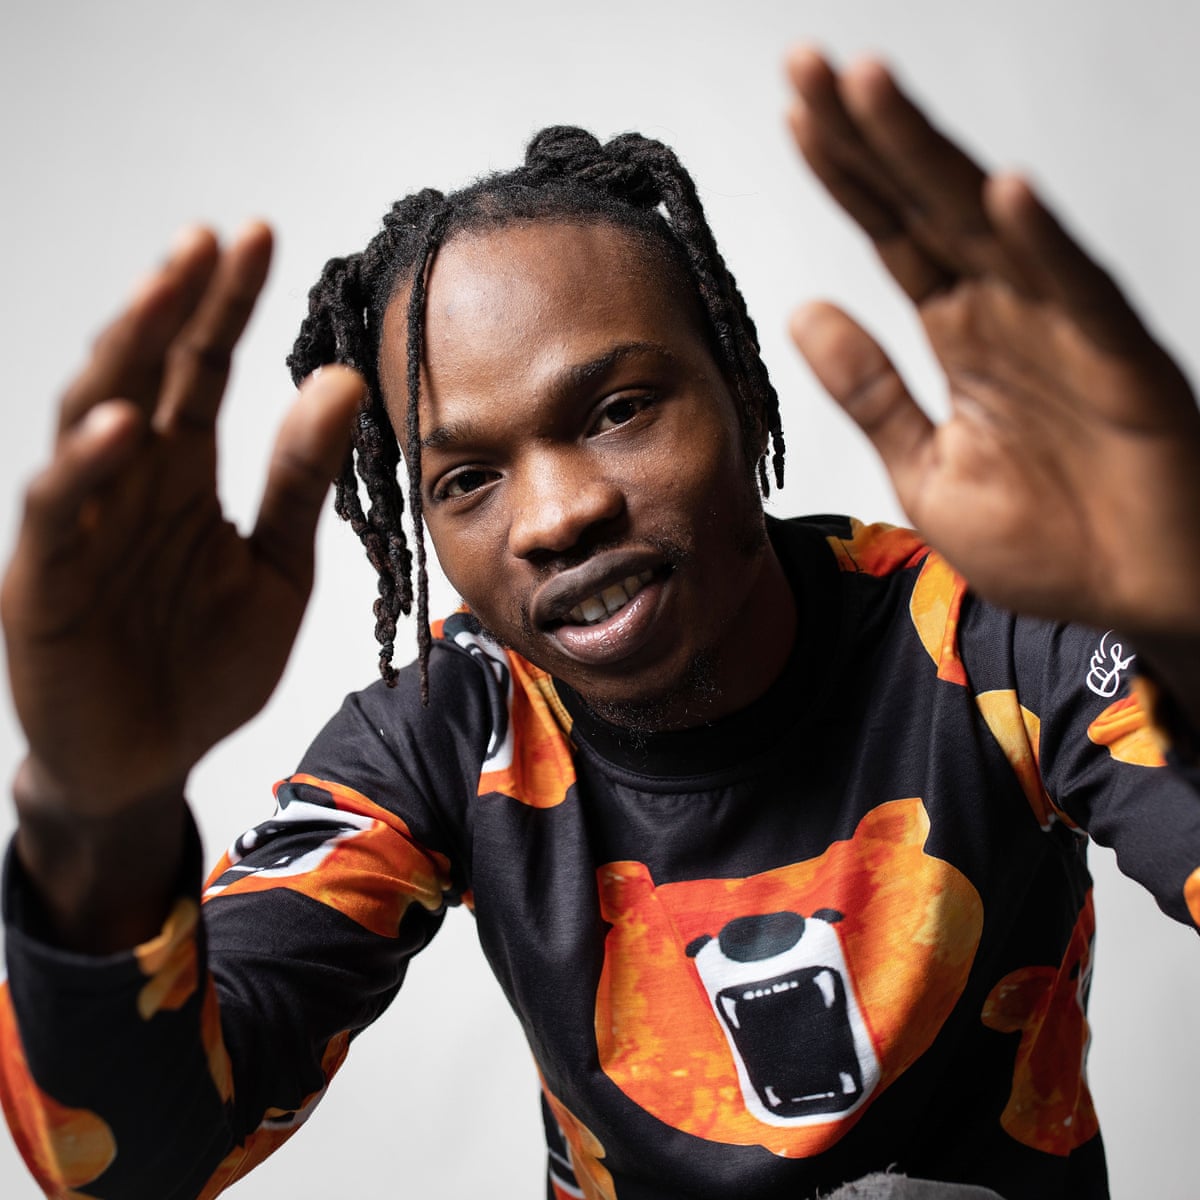 EFCC testifies – Several credit card numbers extracted from Naira Marley’s phone || PEAKVIBEZ